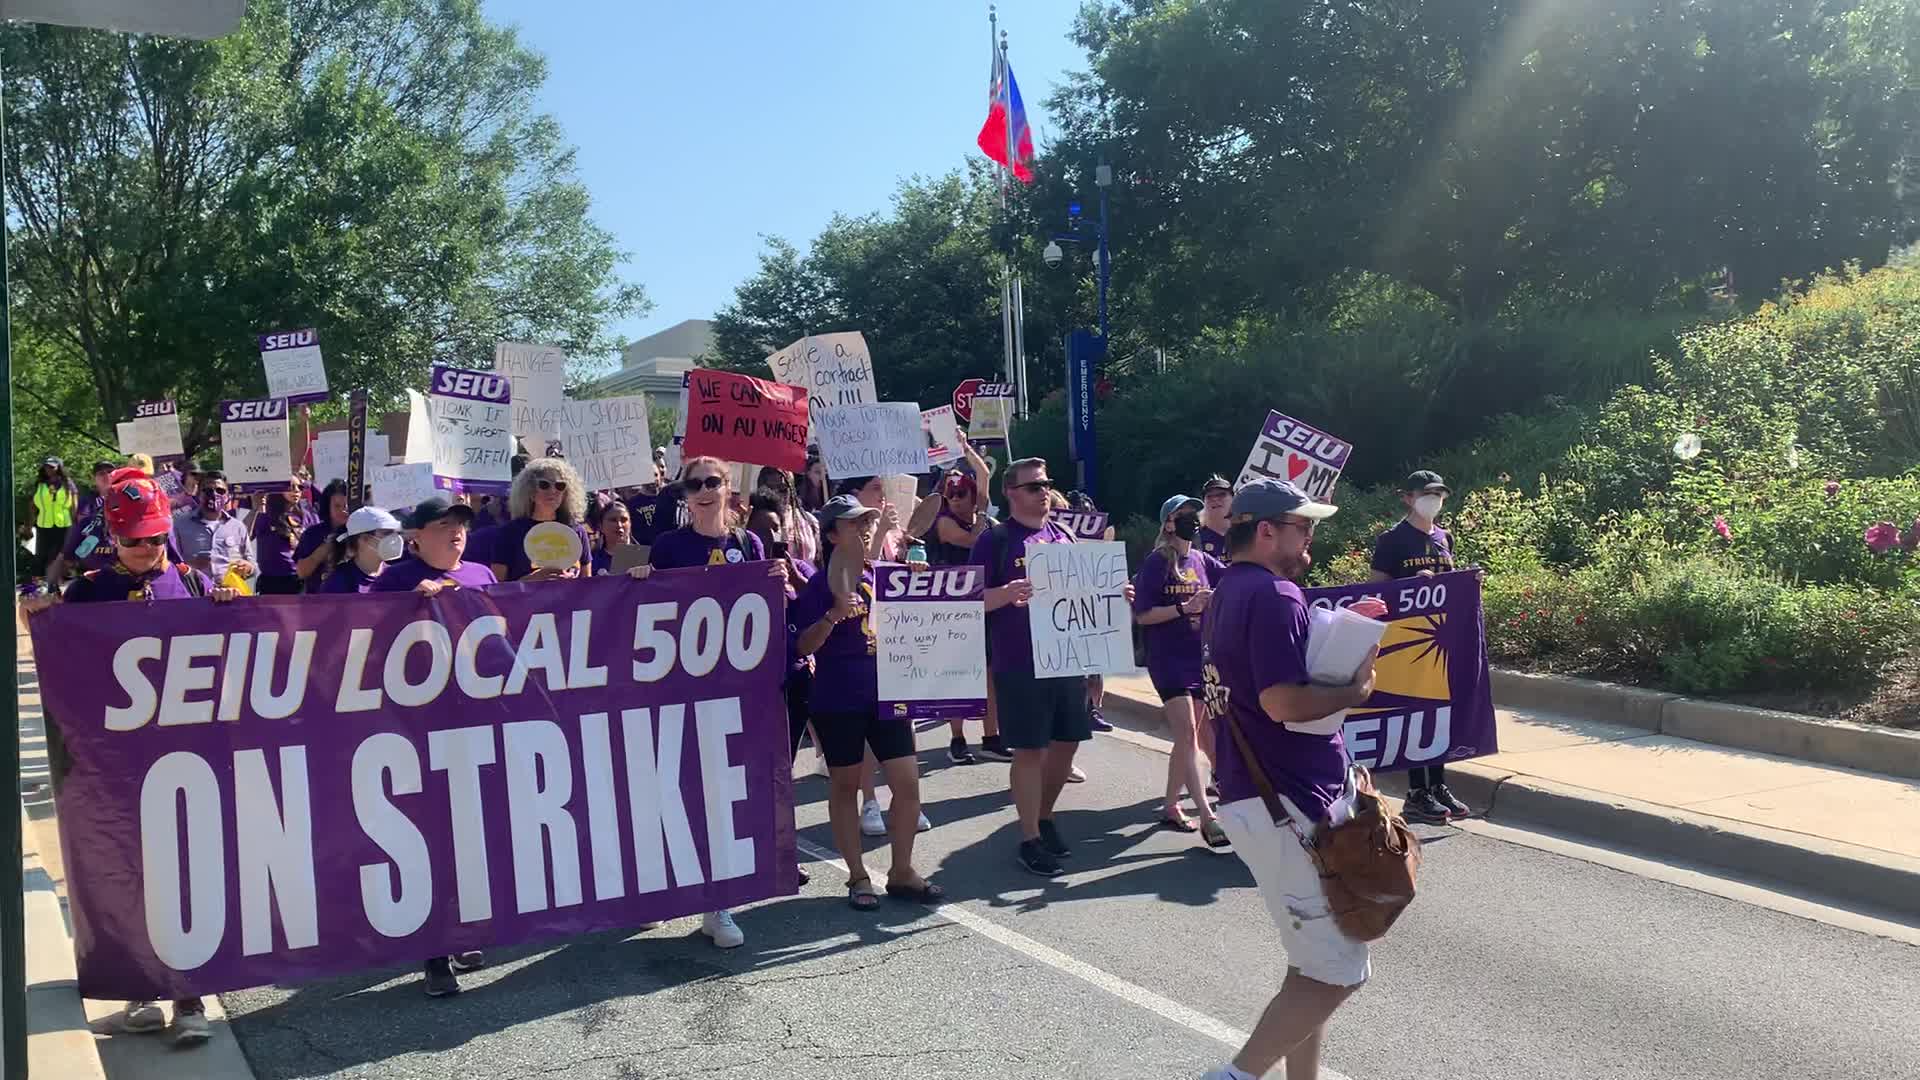 Video of the Strike (20)